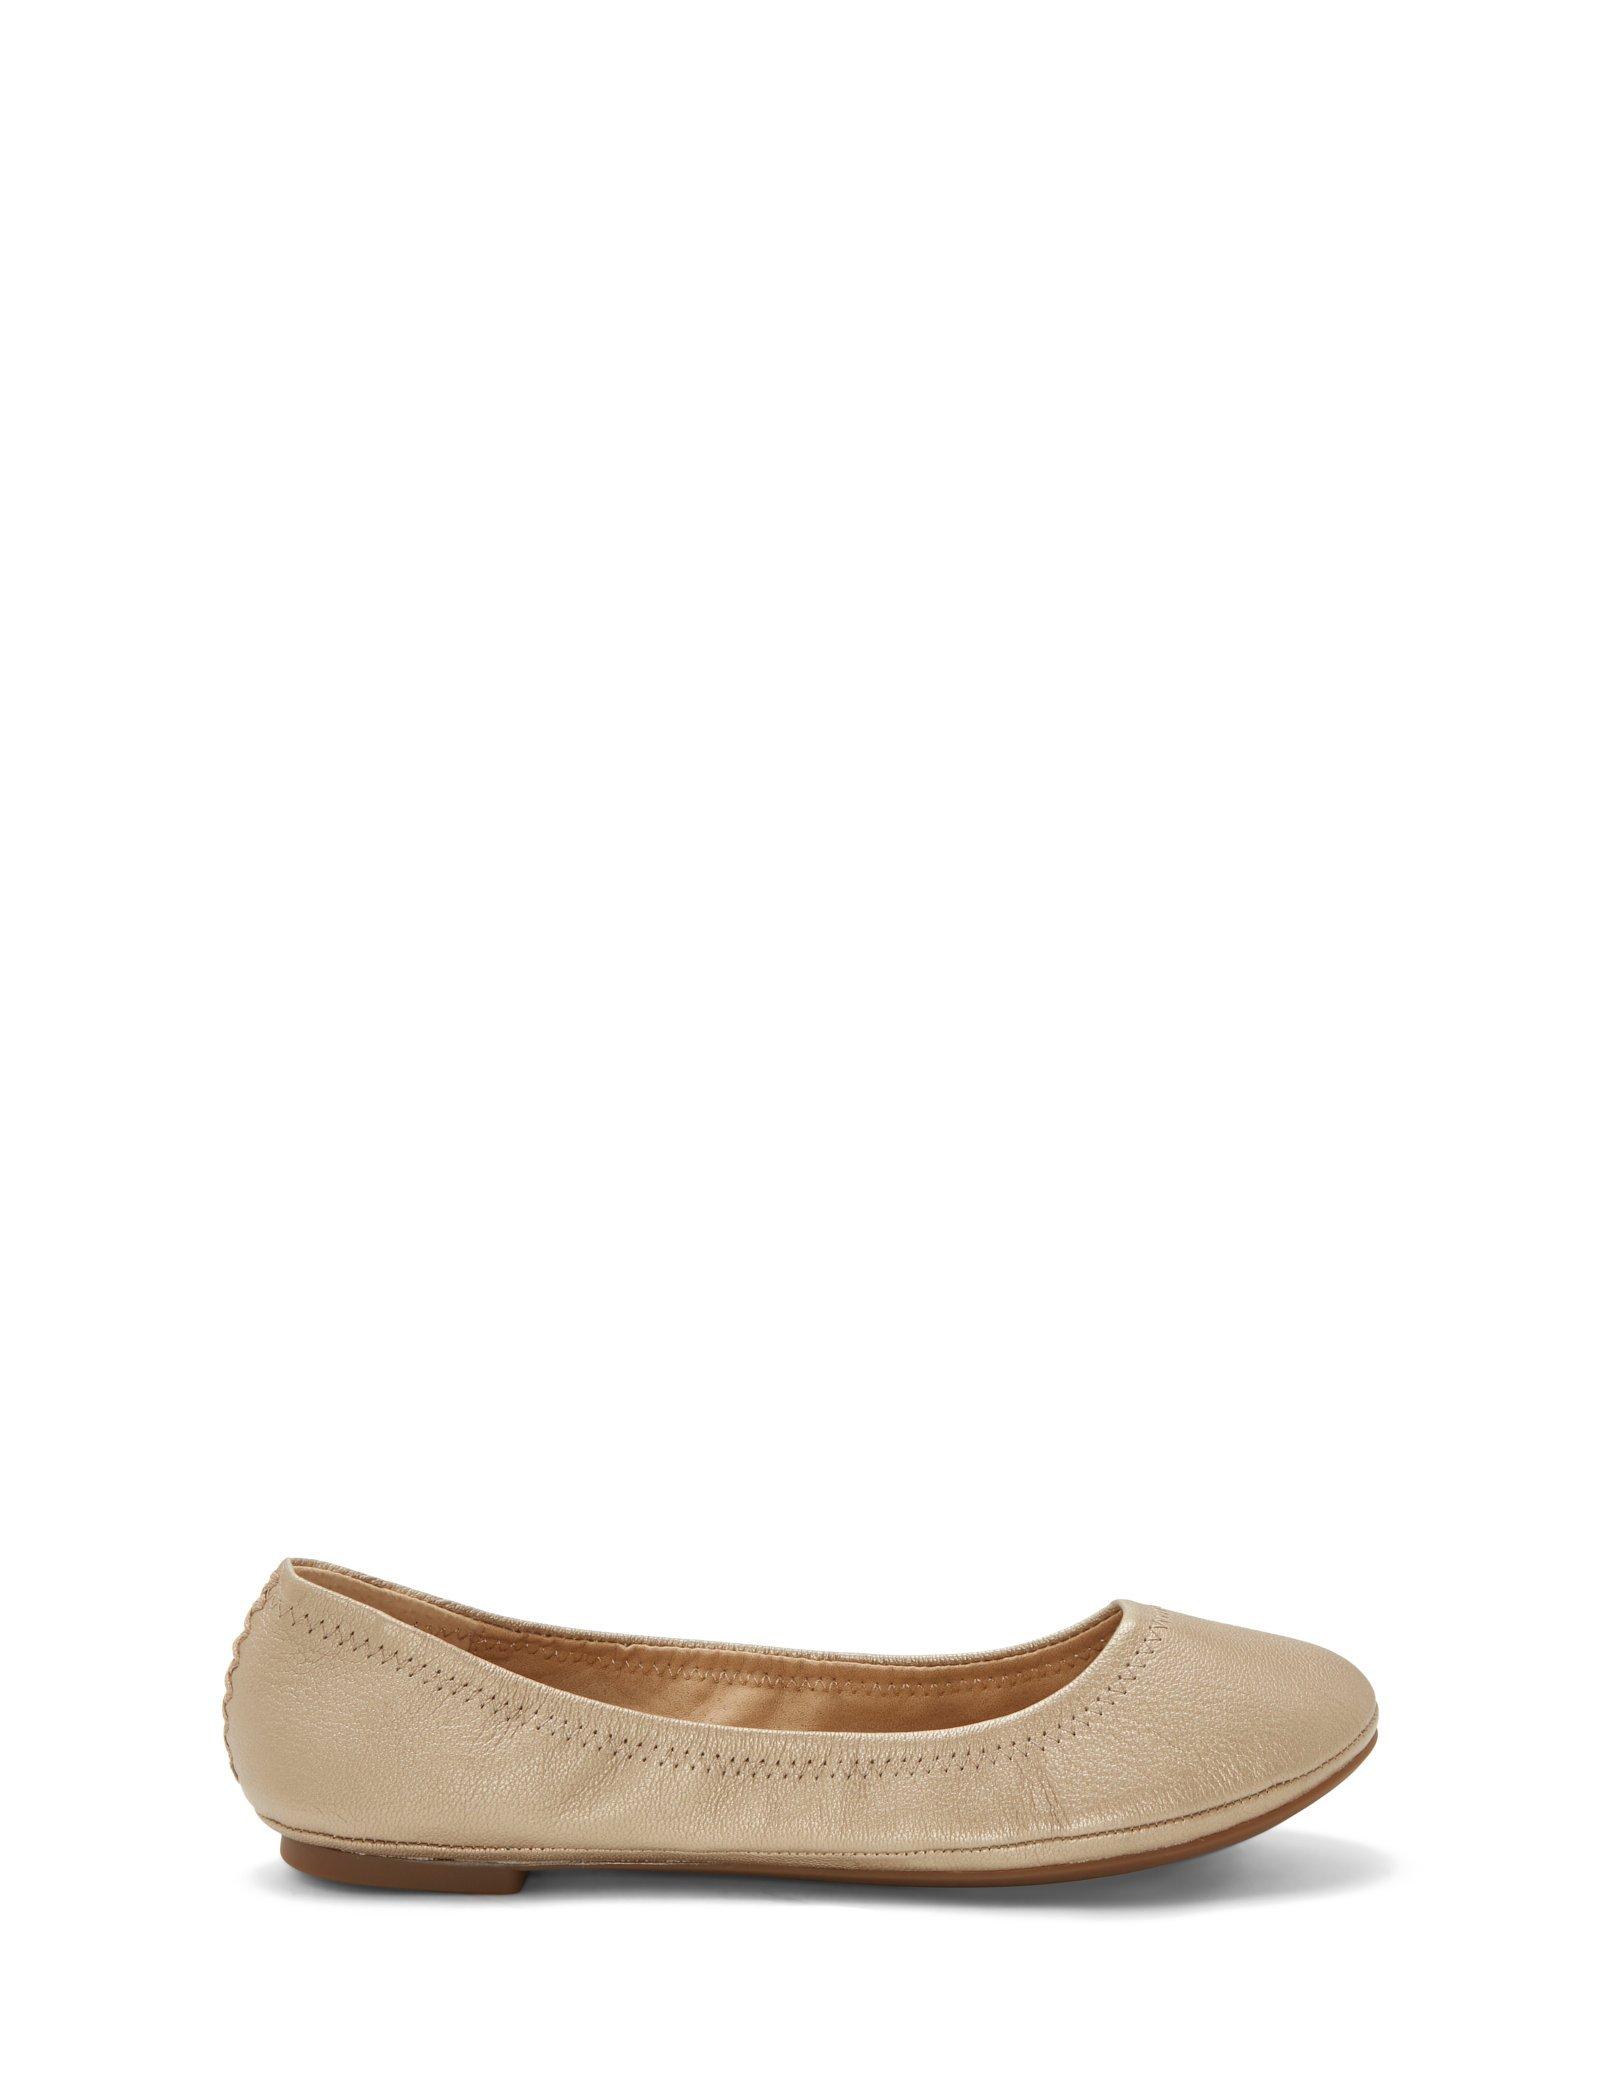 EMMIE LEATHER FLATS, image 7